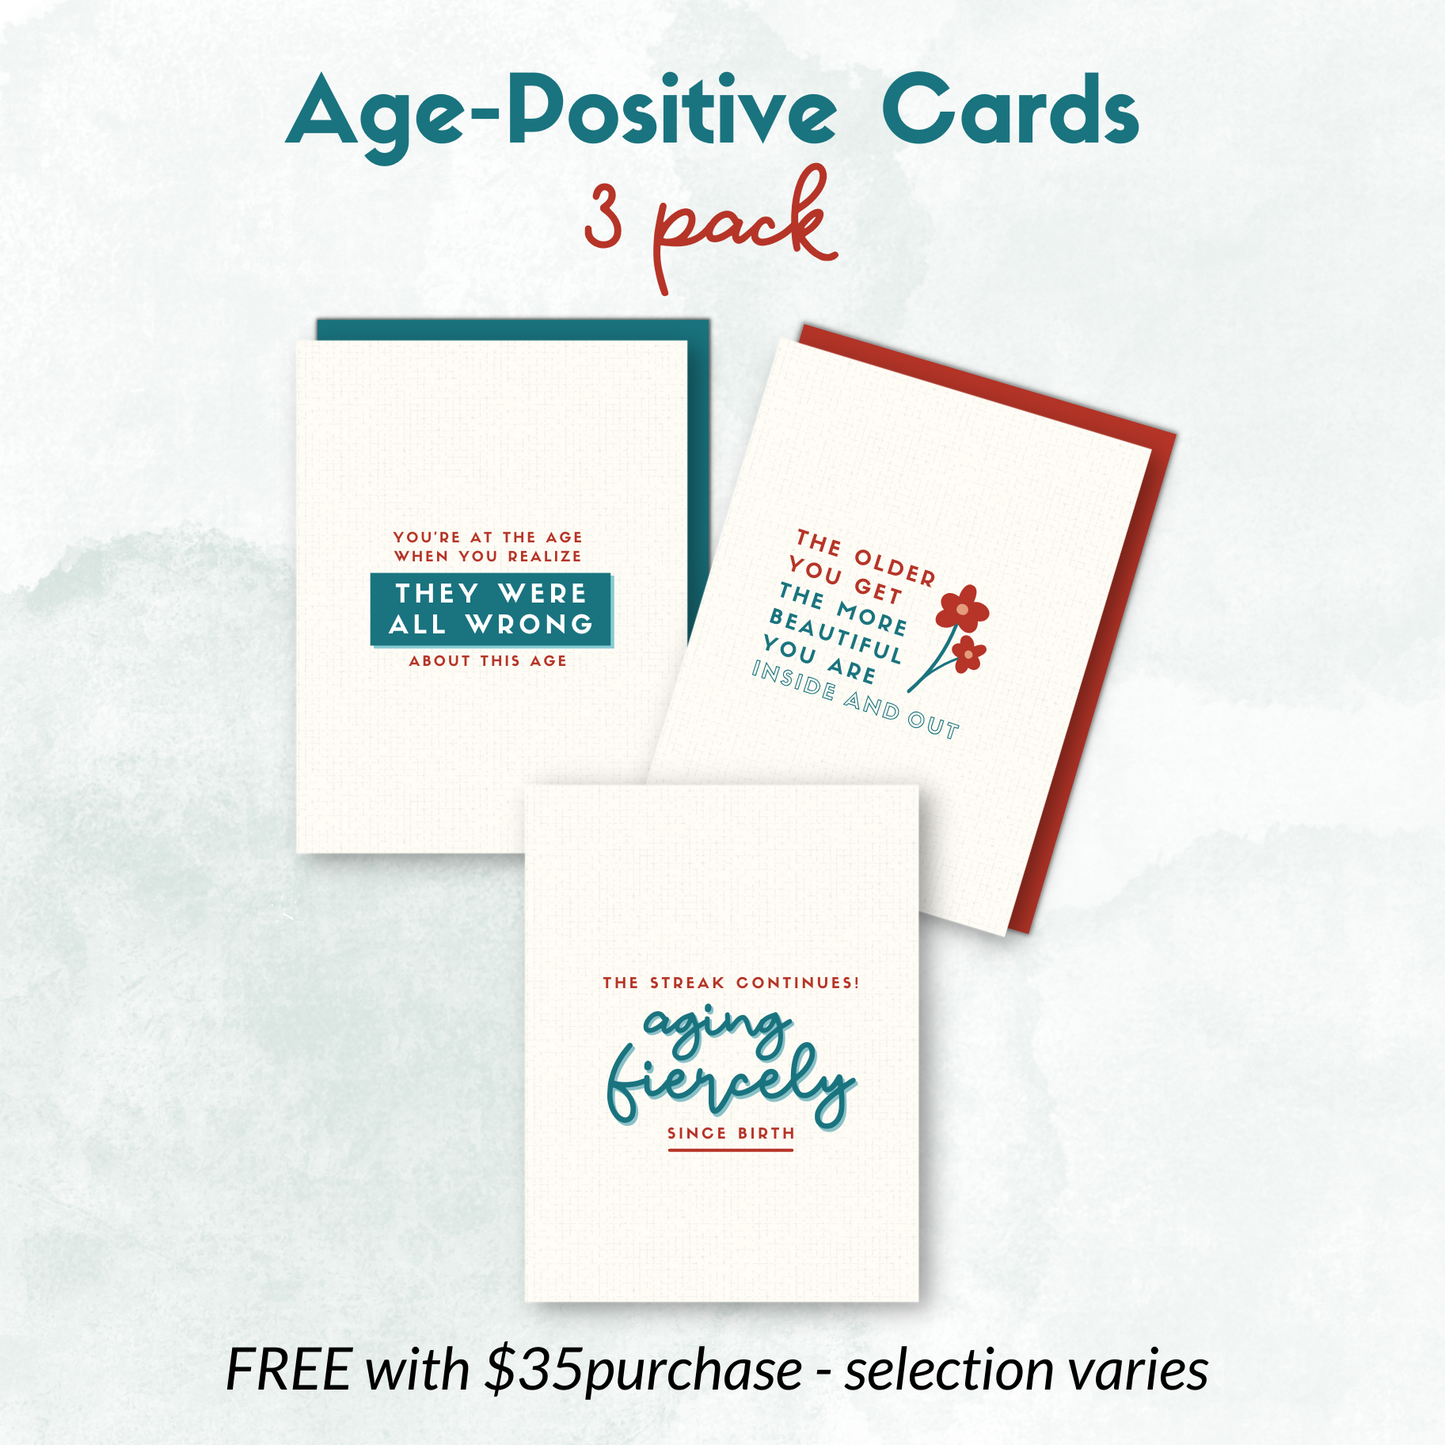 3 FREE Age-Positive Cards